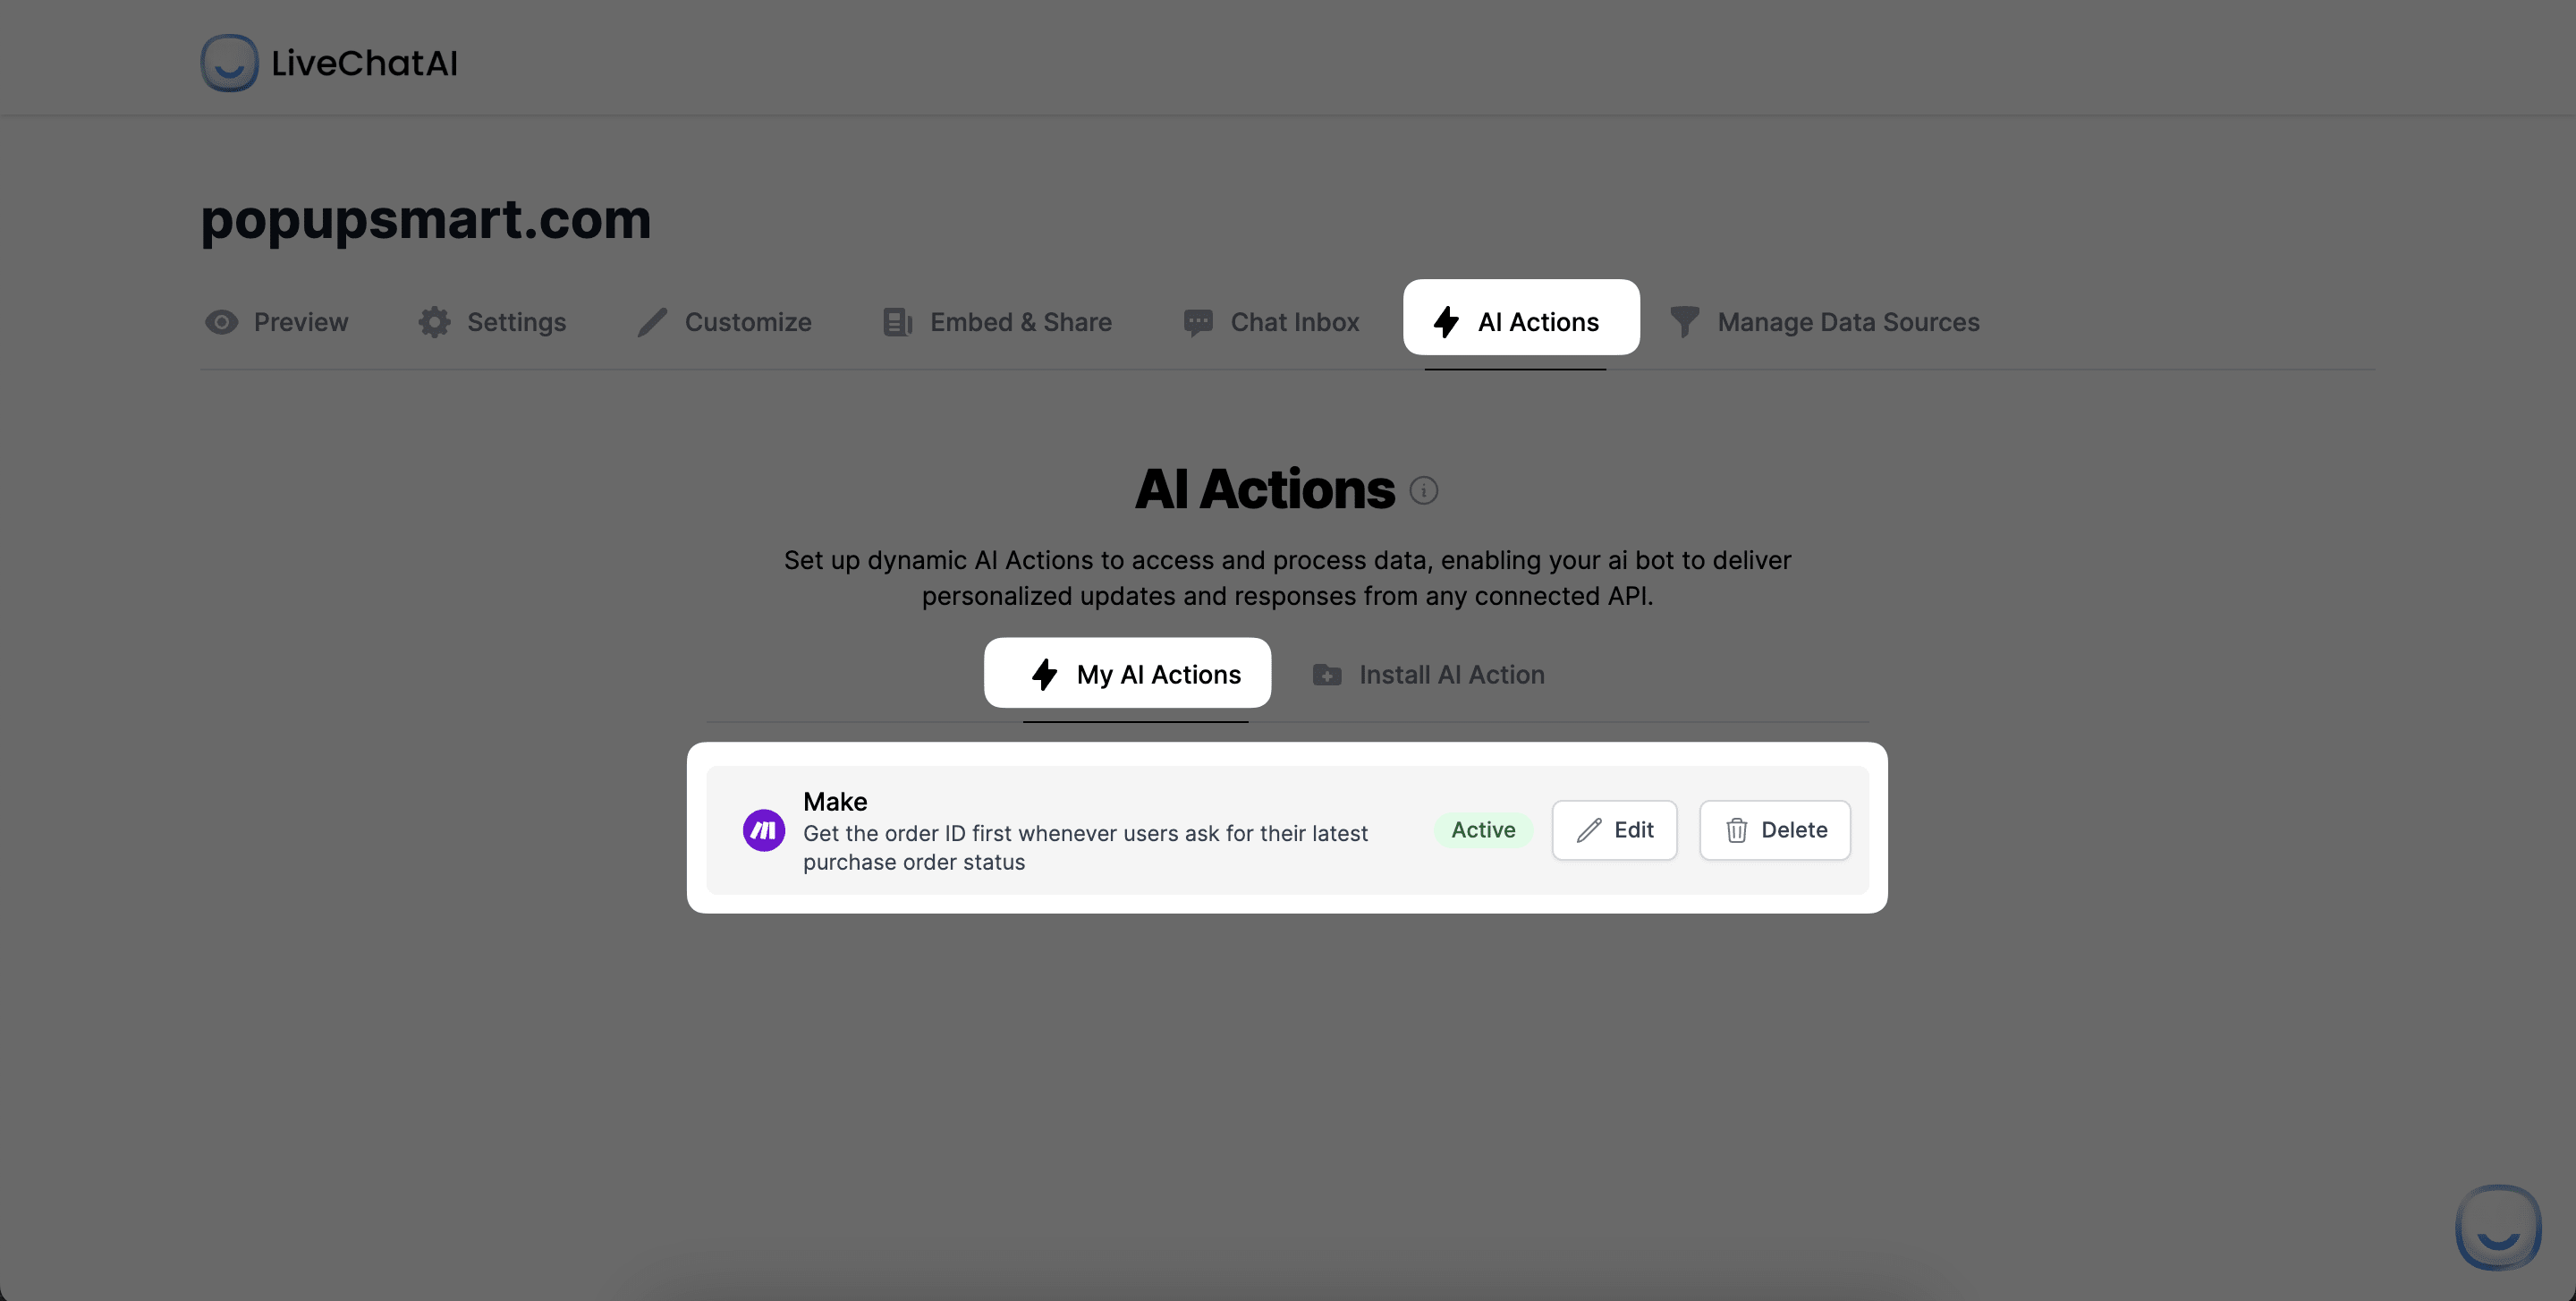 My AI Actions below AI Actions section in LiveChatAI